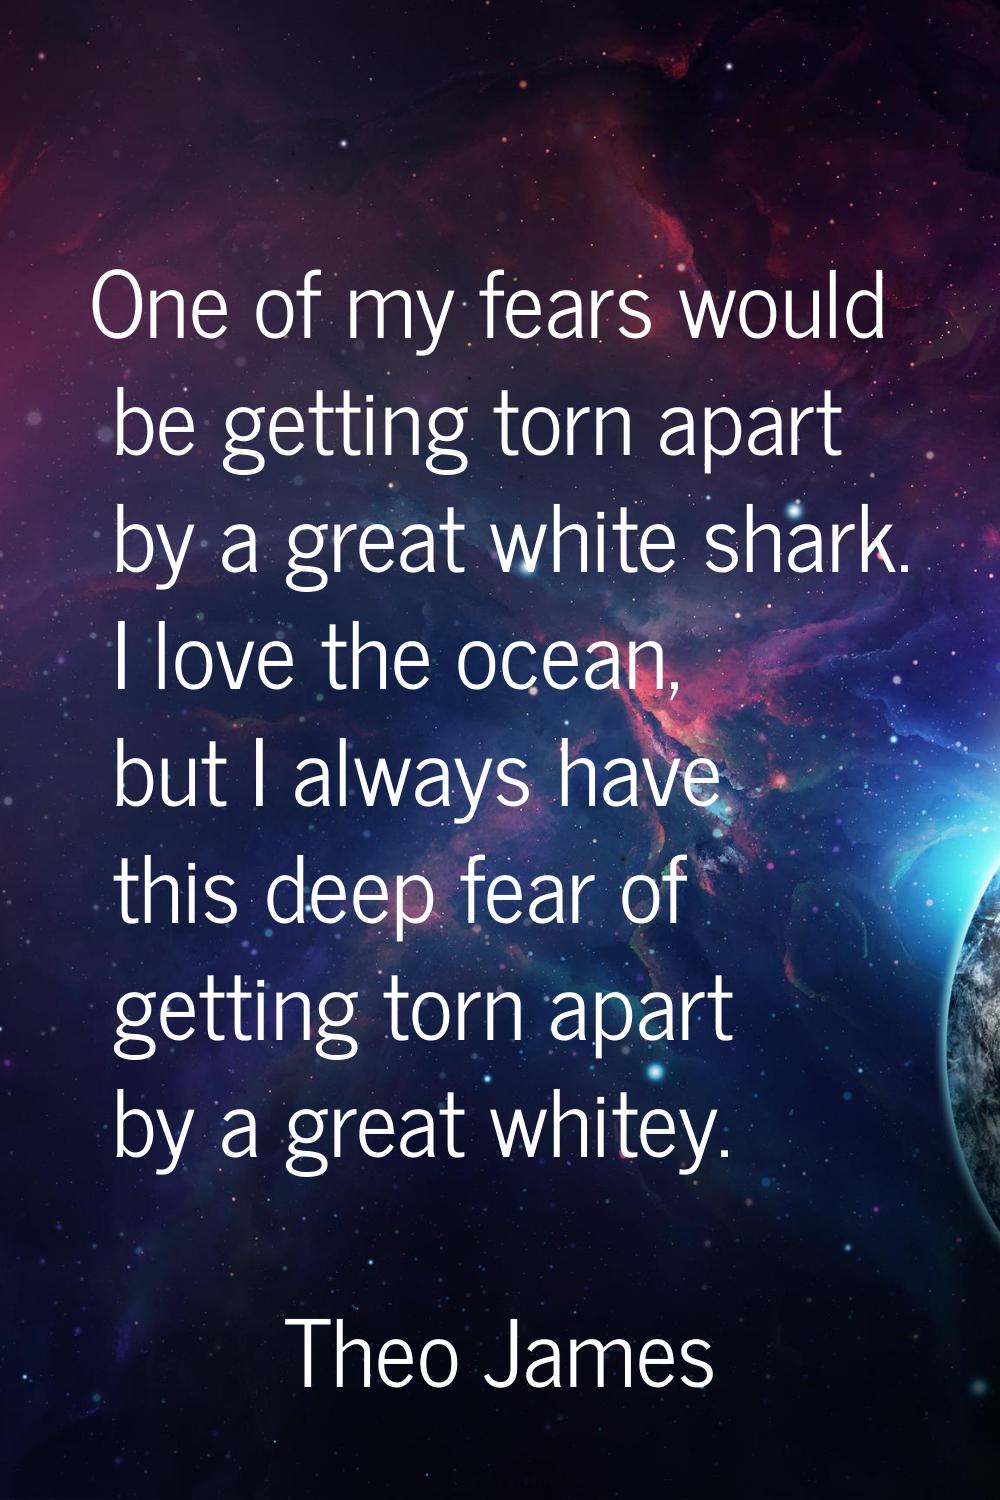 One of my fears would be getting torn apart by a great white shark. I love the ocean, but I always 